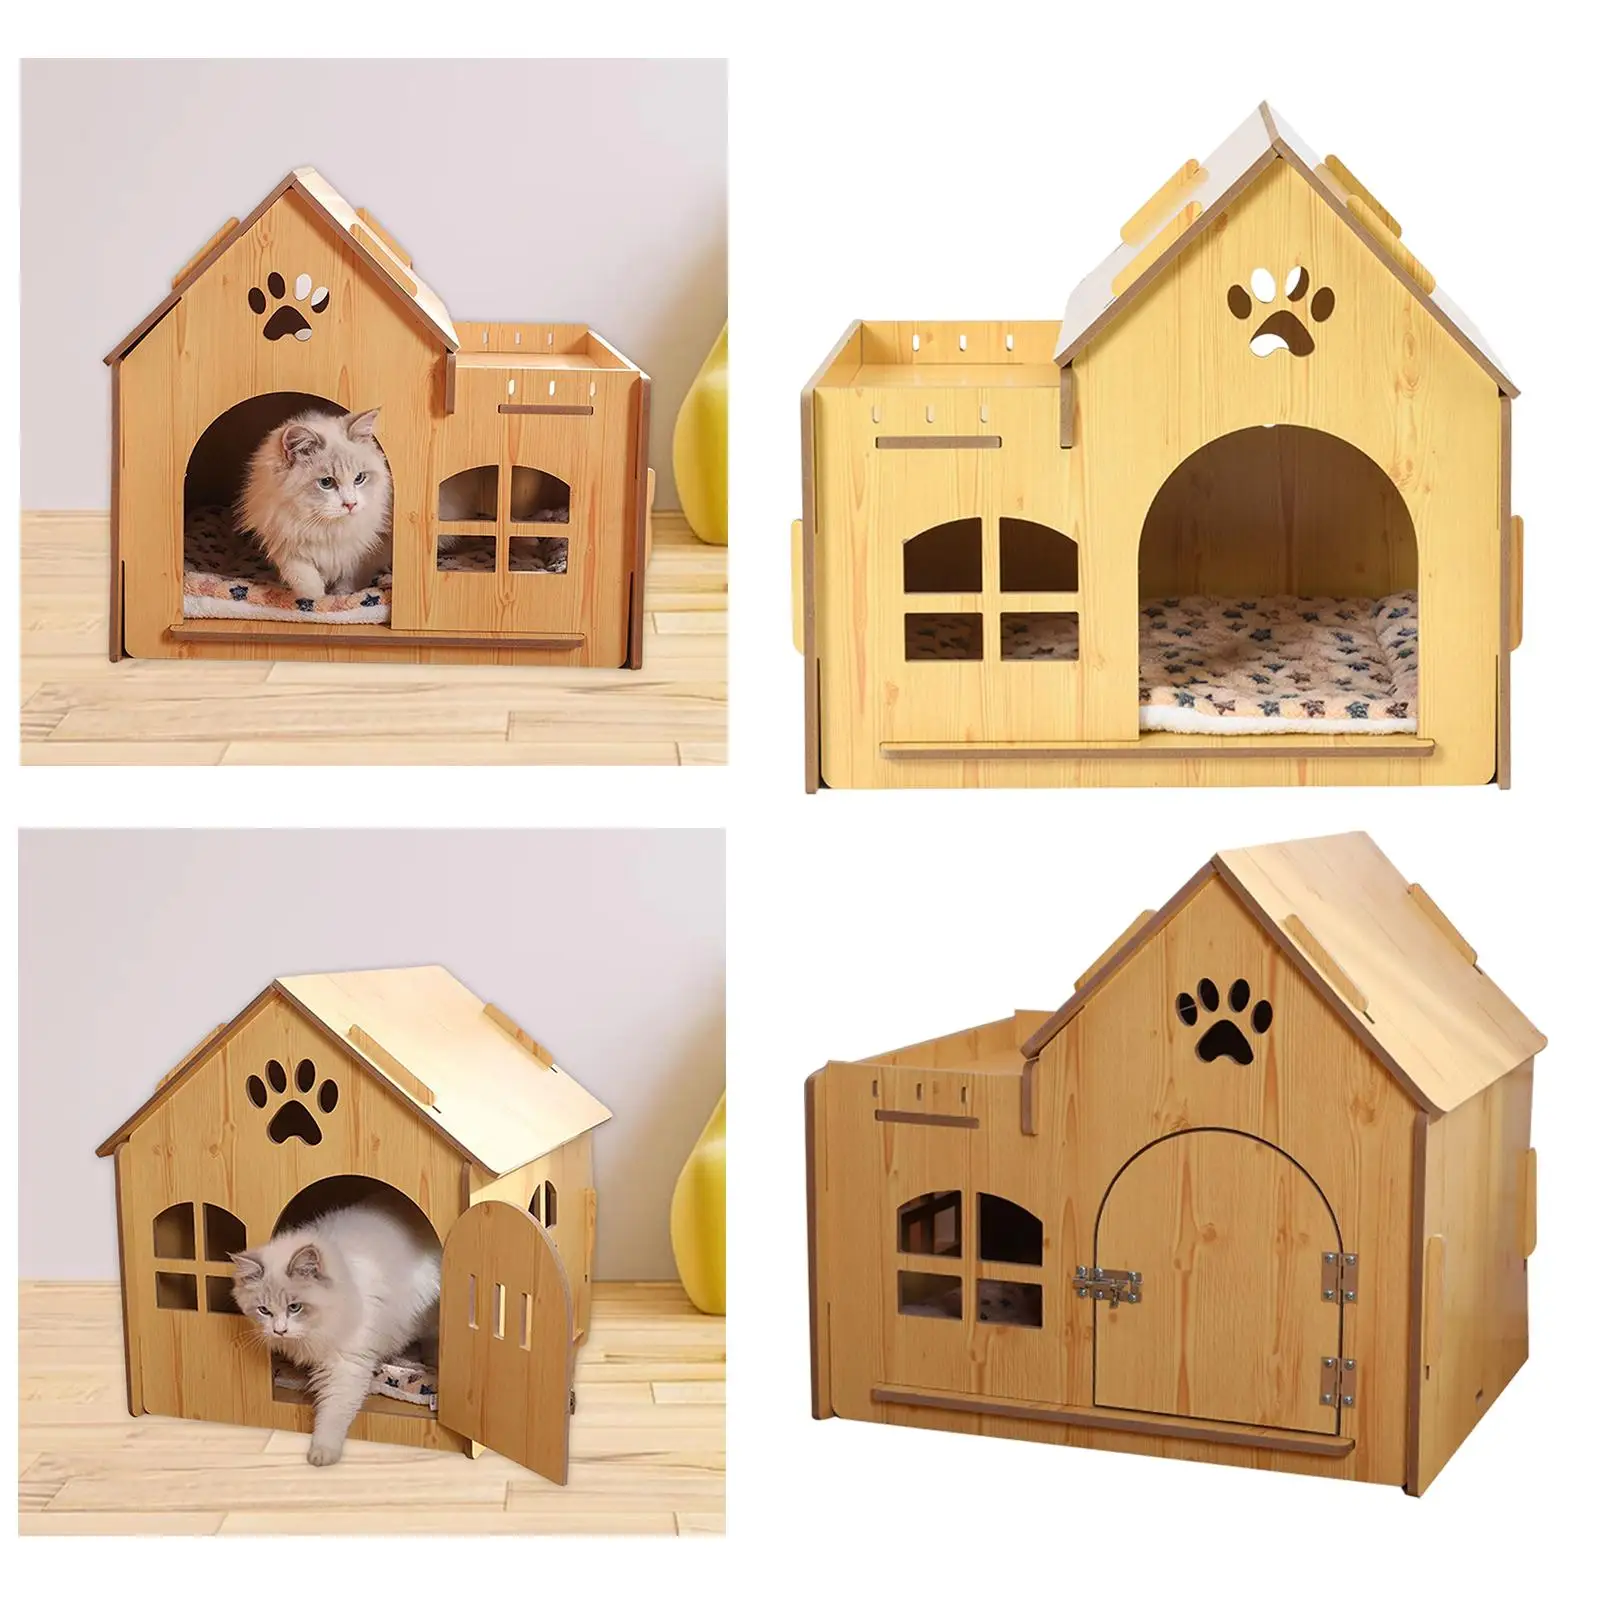 Wooden  House Cat shelters outdoor and Indoor with Warm Cushion Decoration Recyclable Material Sturdy Windproof Durable